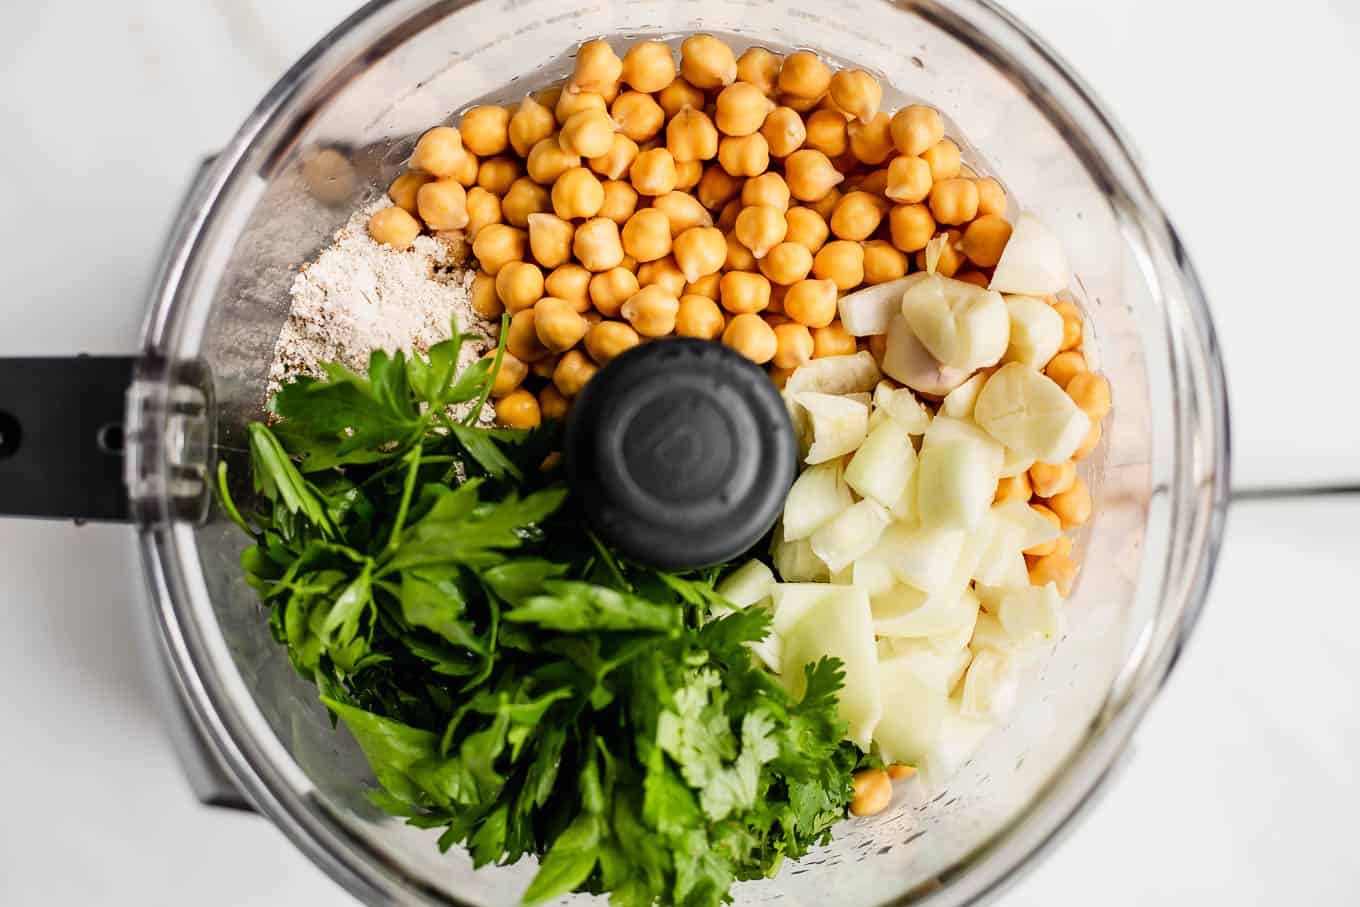 chickpeas, herbs, garlic and onions in a food processor